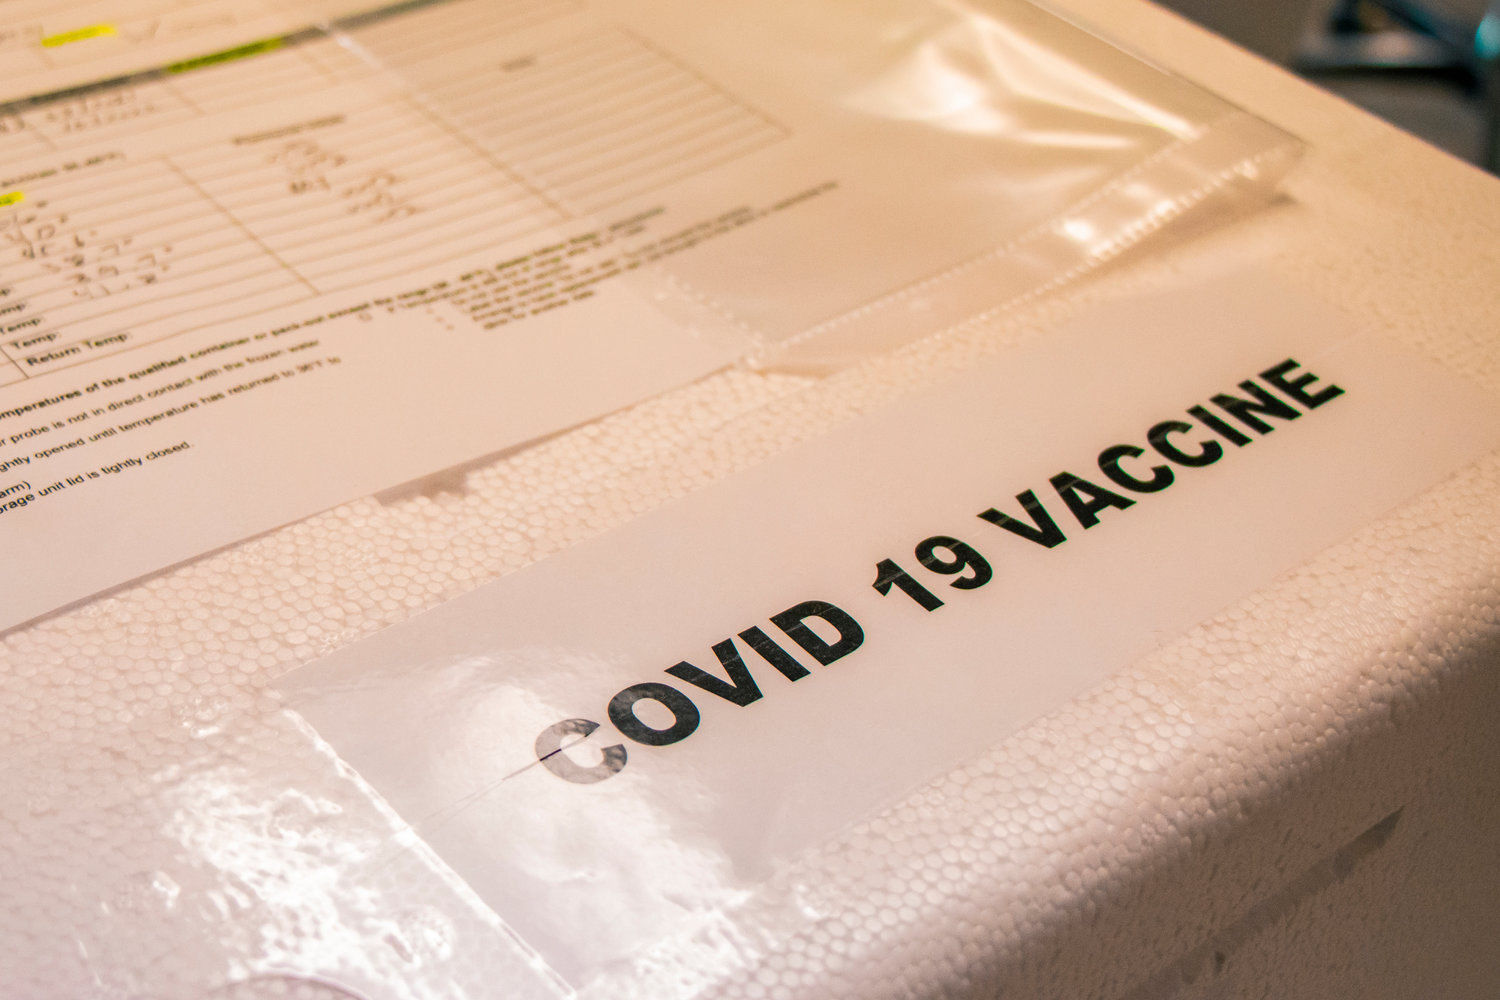 A cooler containing the Pfizer COVID-19 vaccine sits on a table at Prestige Post-Acute and Rehab Center last January.